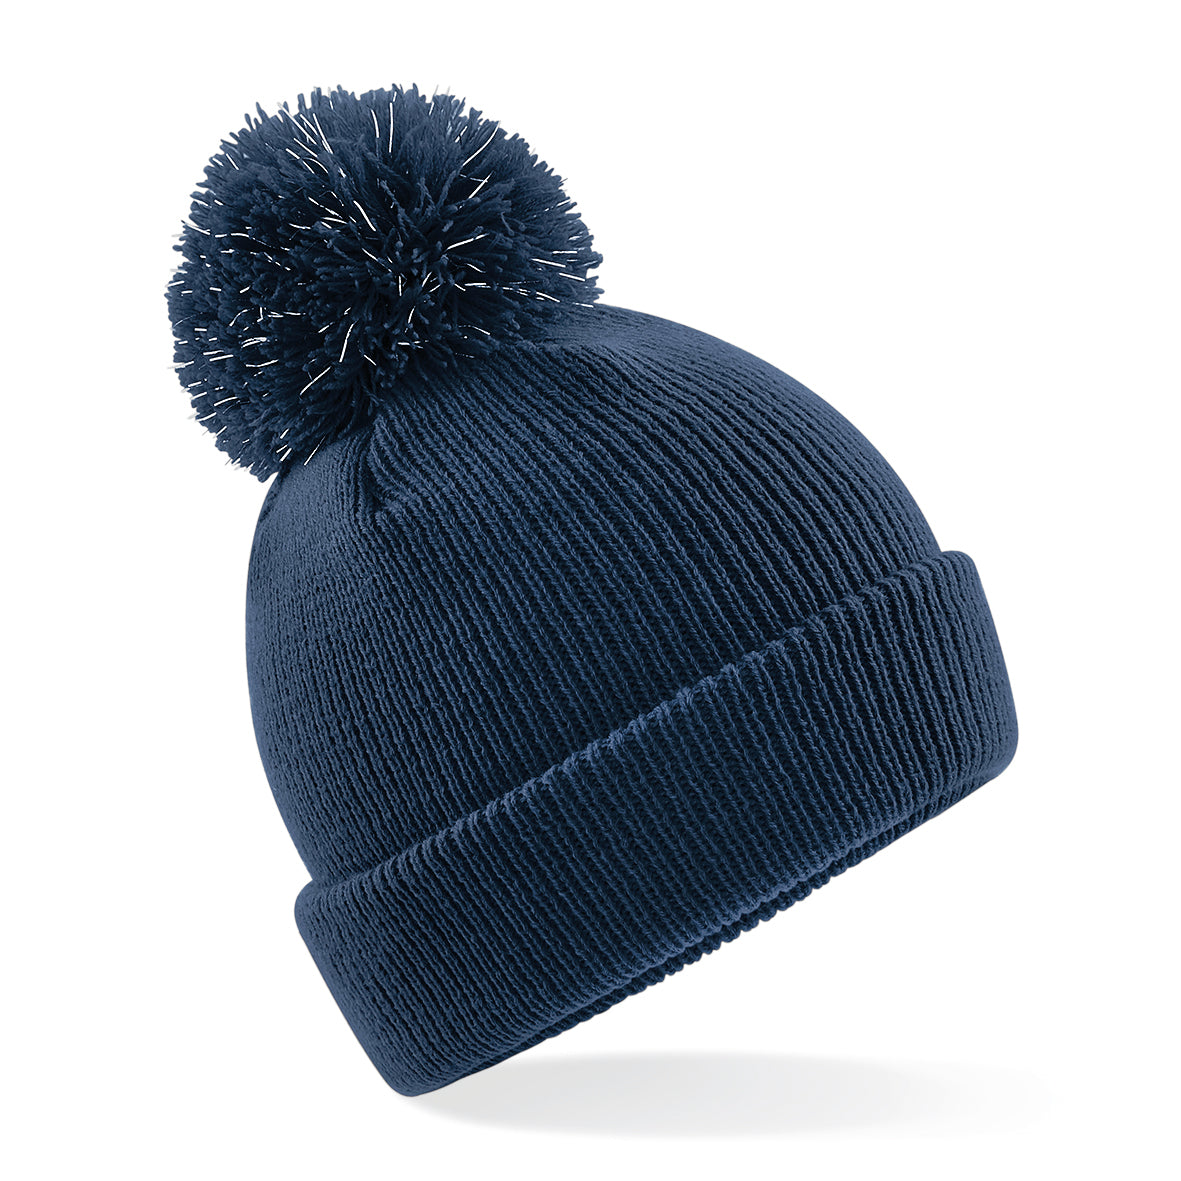 Junior Reflective beanie - Ideal for school kids - Be Safe Be Seen - Pom Pom Hat